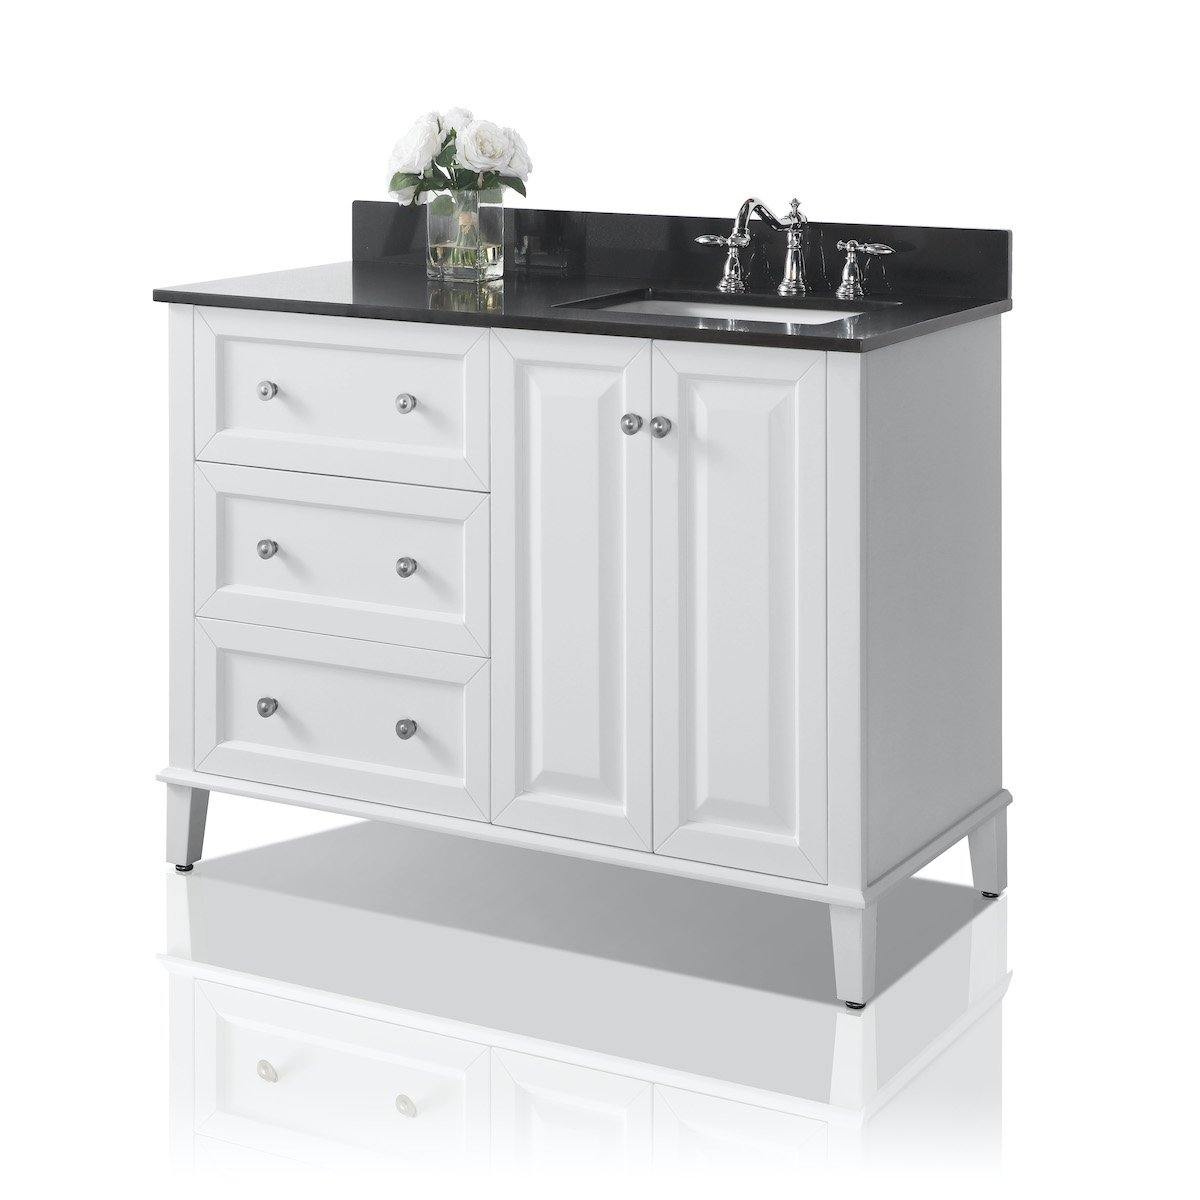 Ancerre Designs Hannah 48 Inch White Single Vanity with Right Basin and Nickel Hardware Side